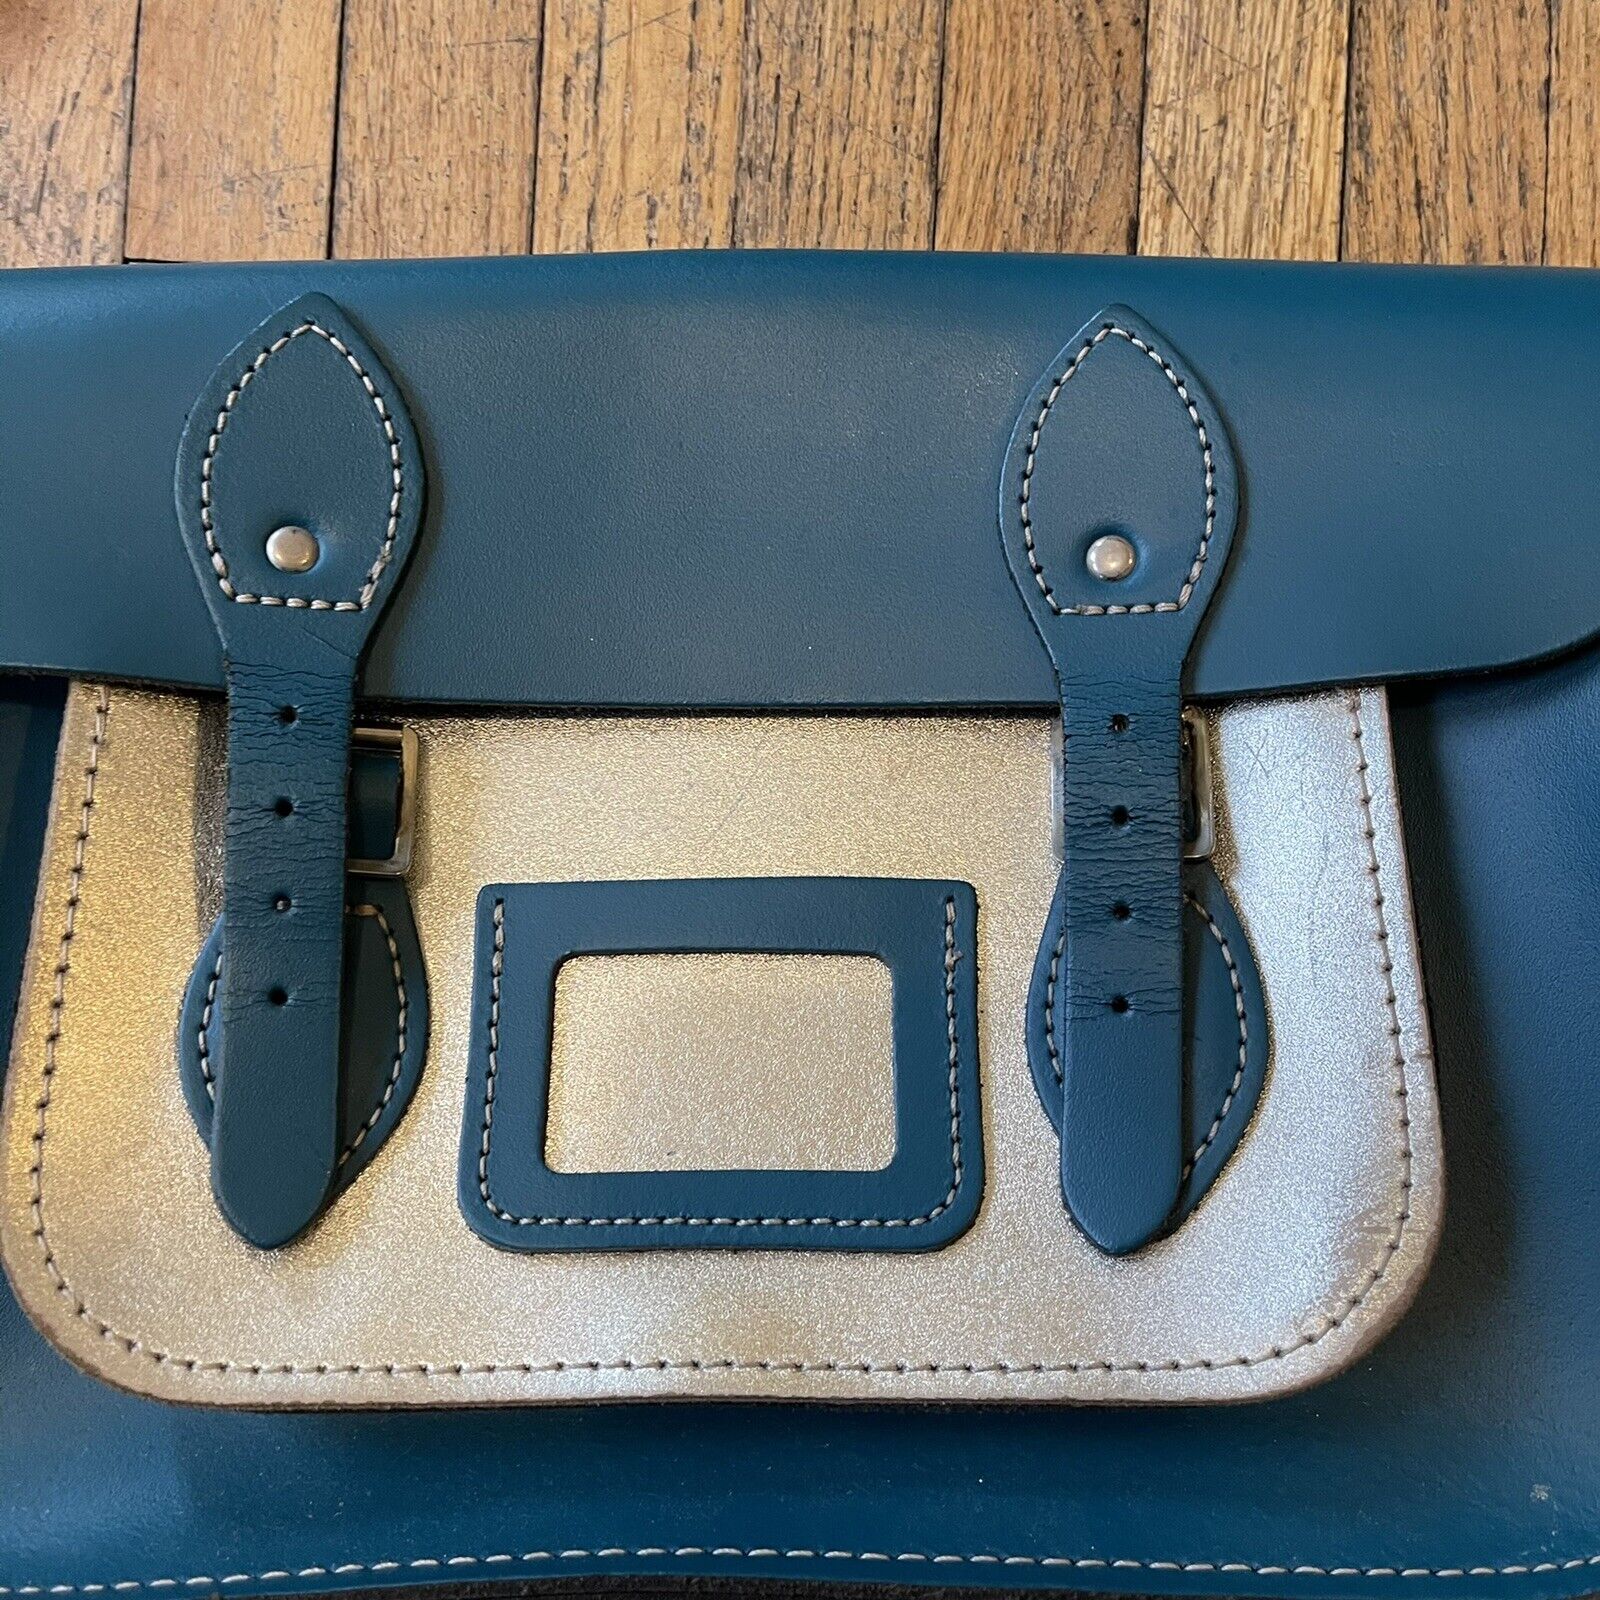 THE LEATHER SATCHEL CO. Satchel in Teal Blue And Silver Made In UK